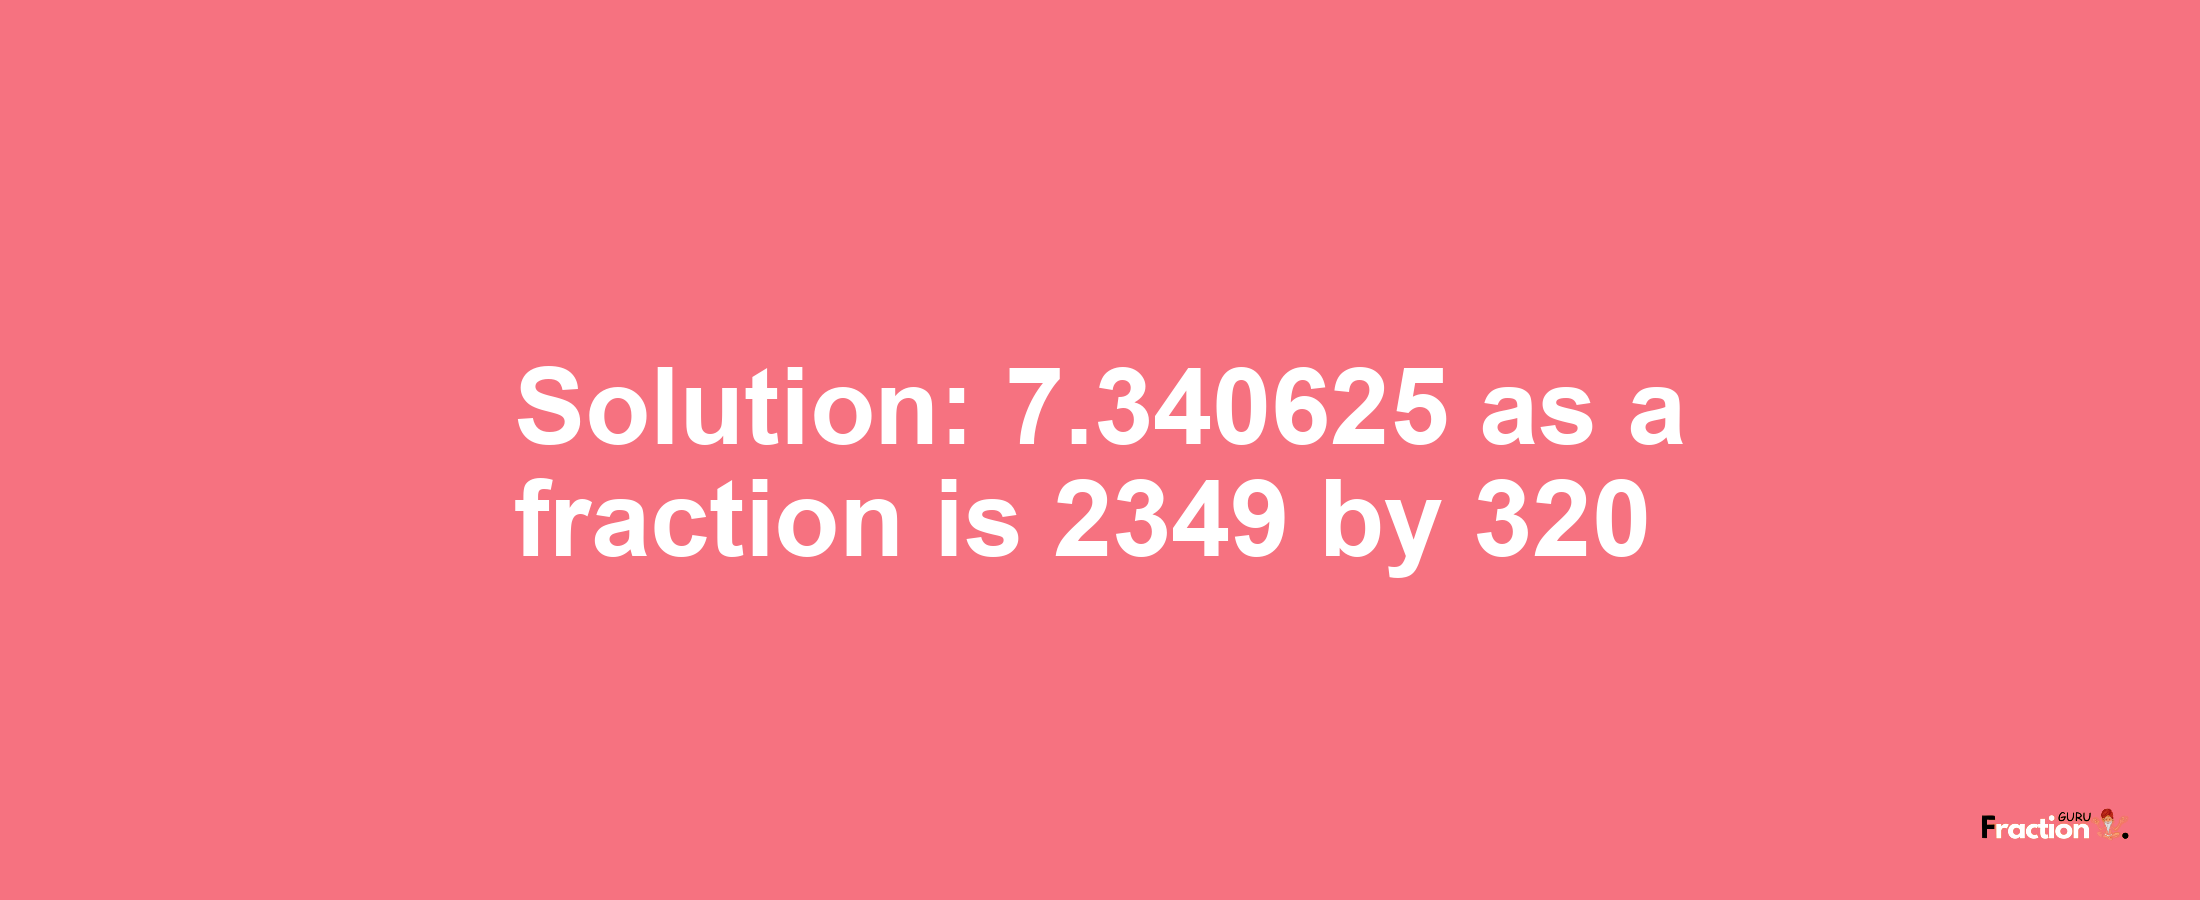 Solution:7.340625 as a fraction is 2349/320